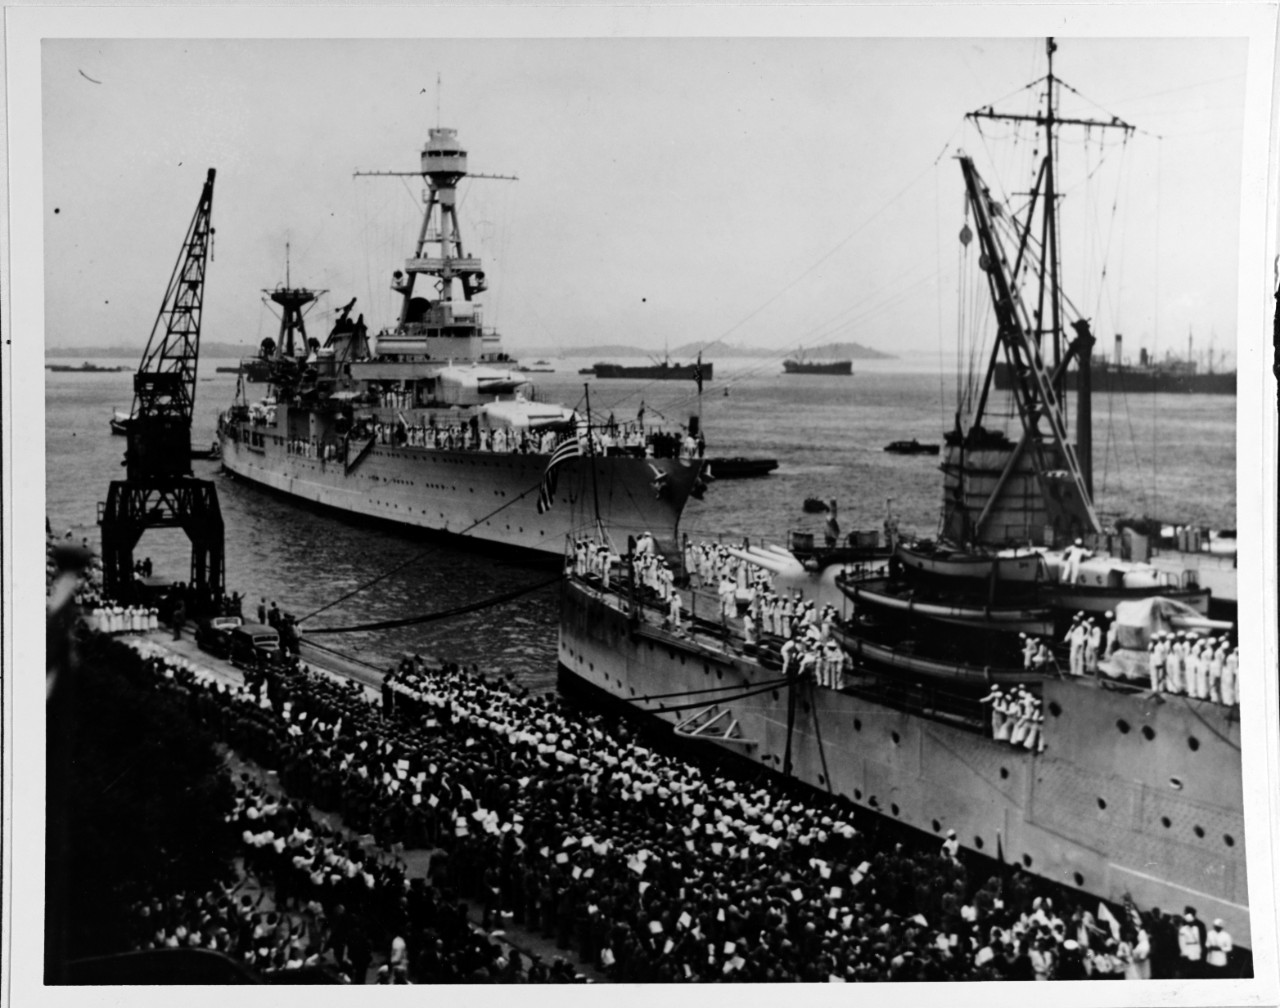 Photo #: NH 68102  President Franklin D. Roosevelt's South American Goodwill Cruise, 1936